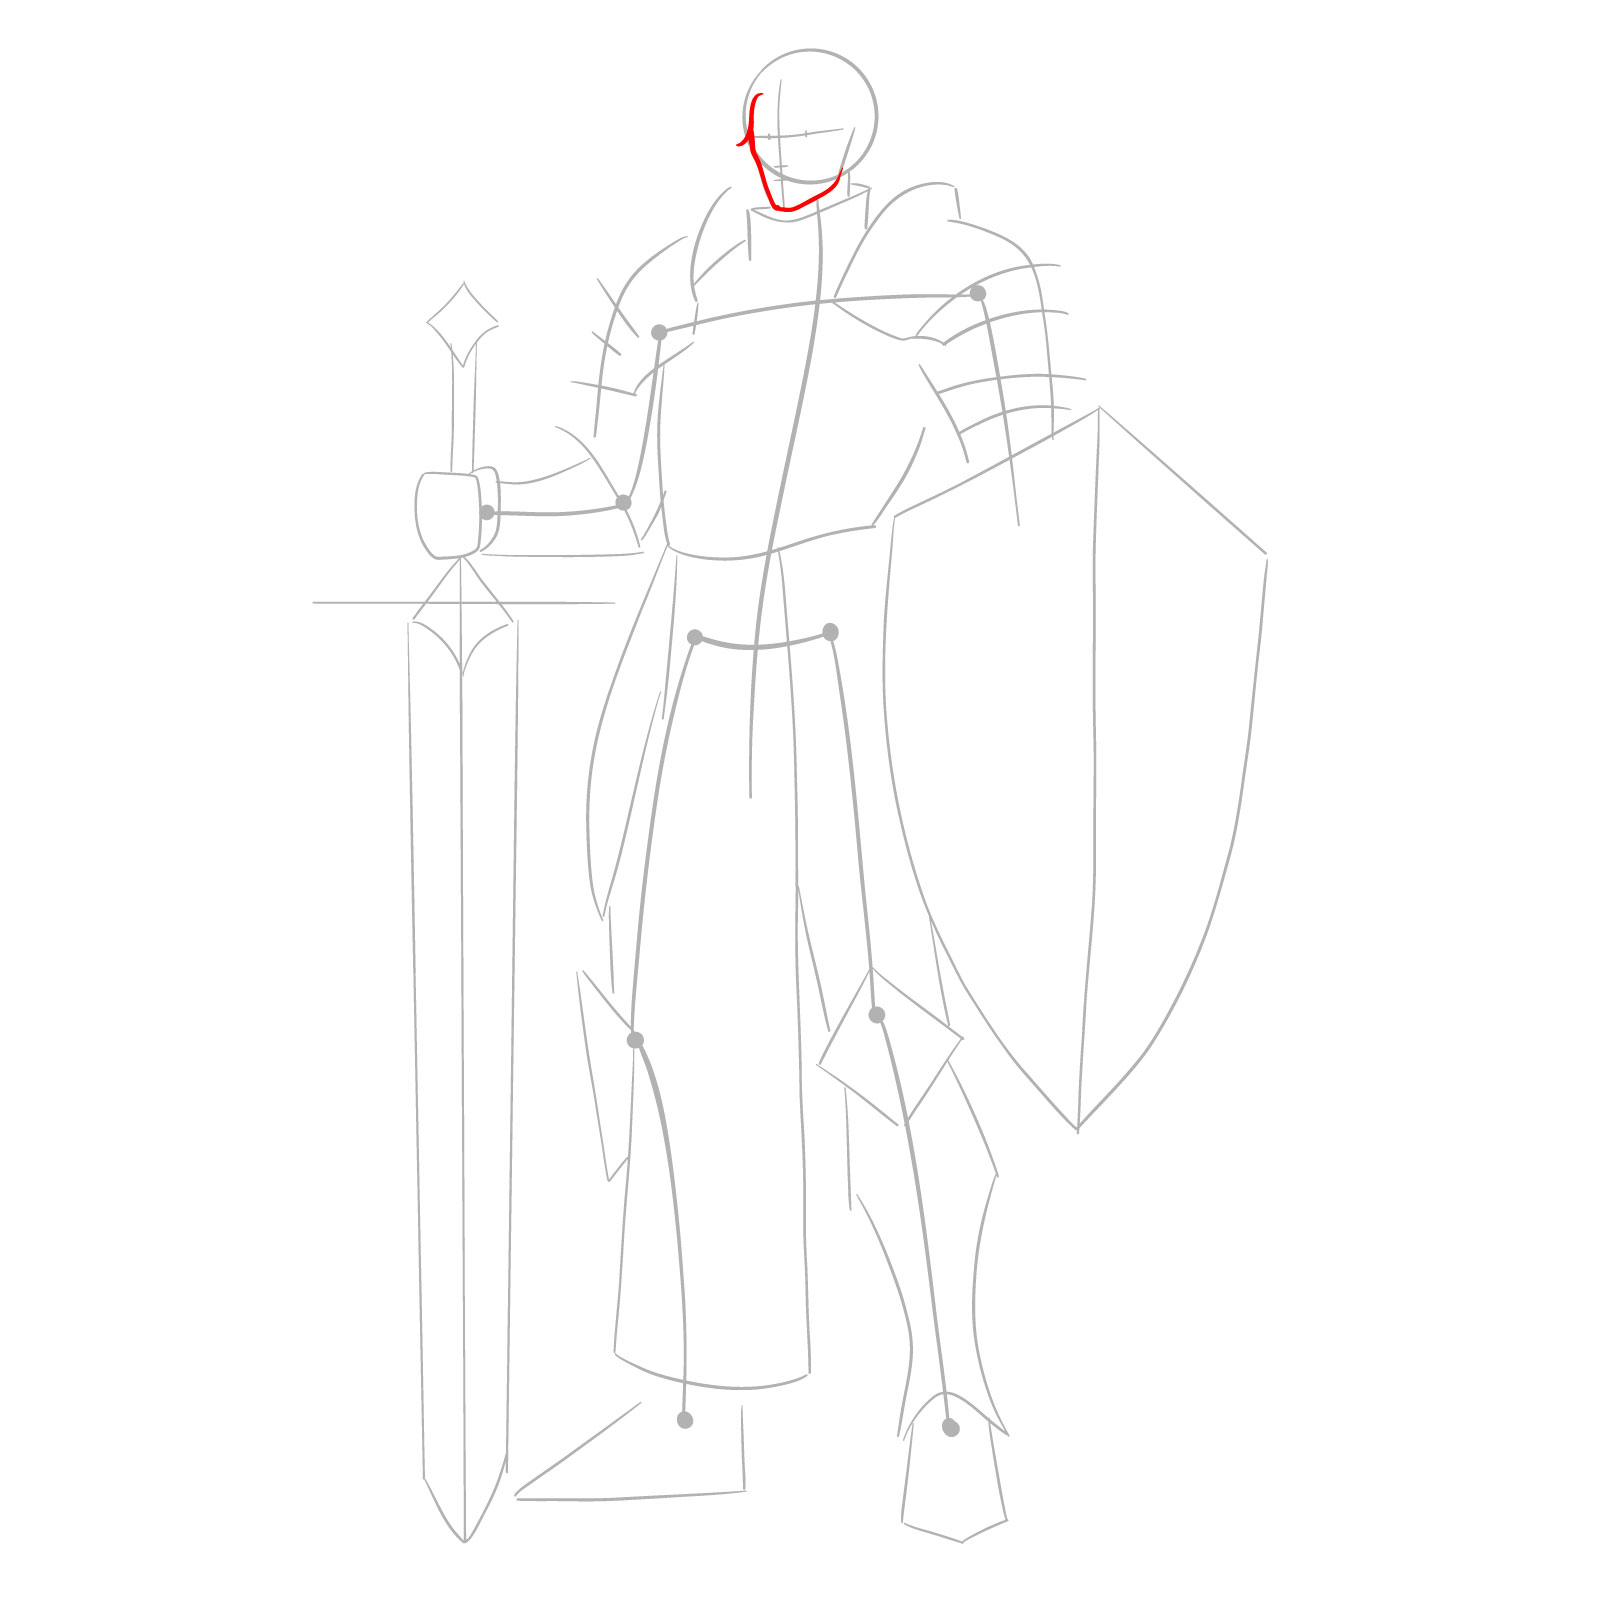 Refining the face outline in the paladin drawing - step 04